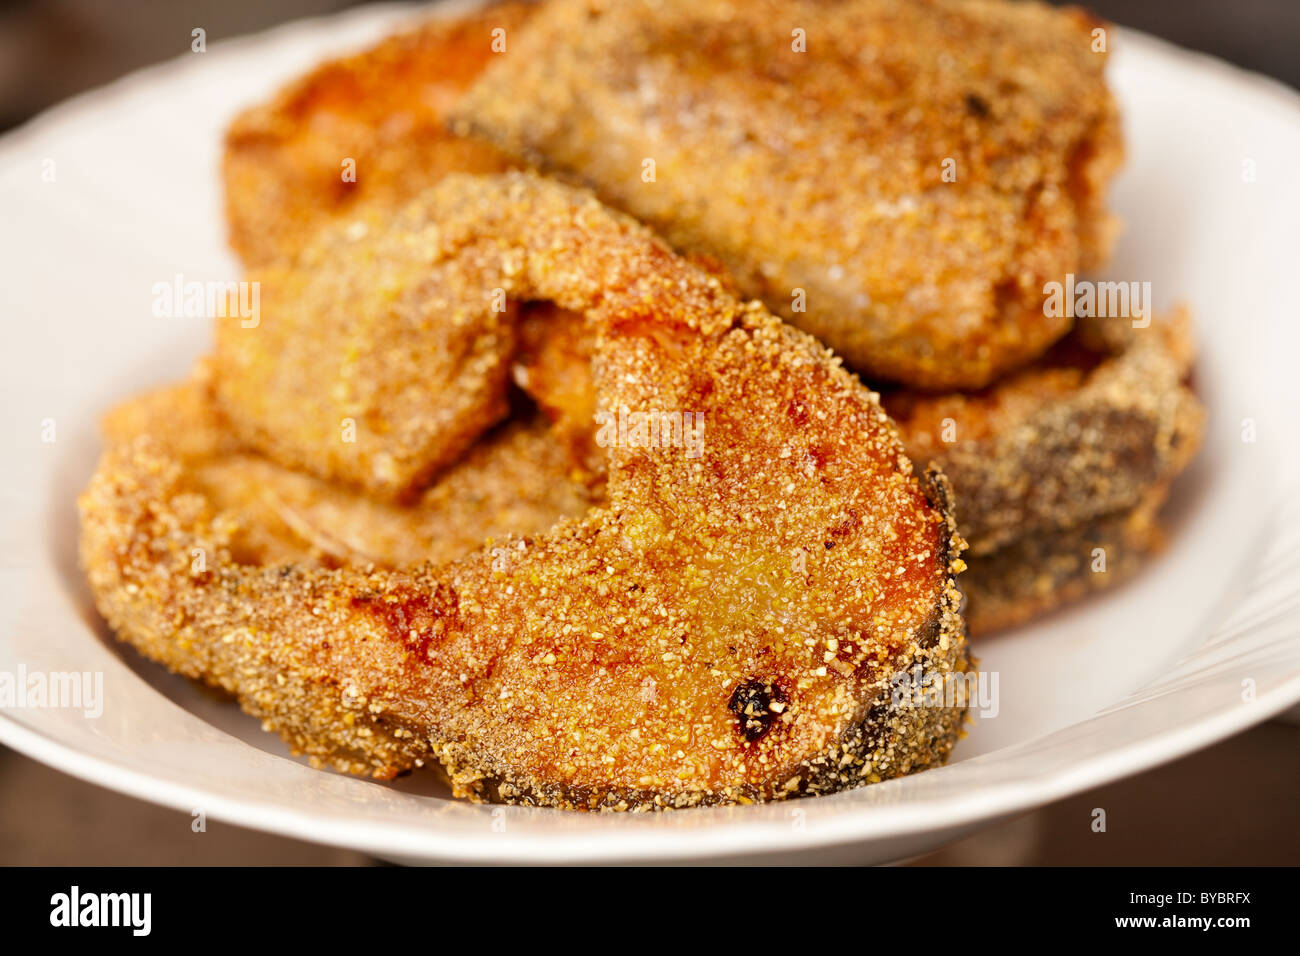 Delicious salmon fillets roasted in the frying pan Stock Photo